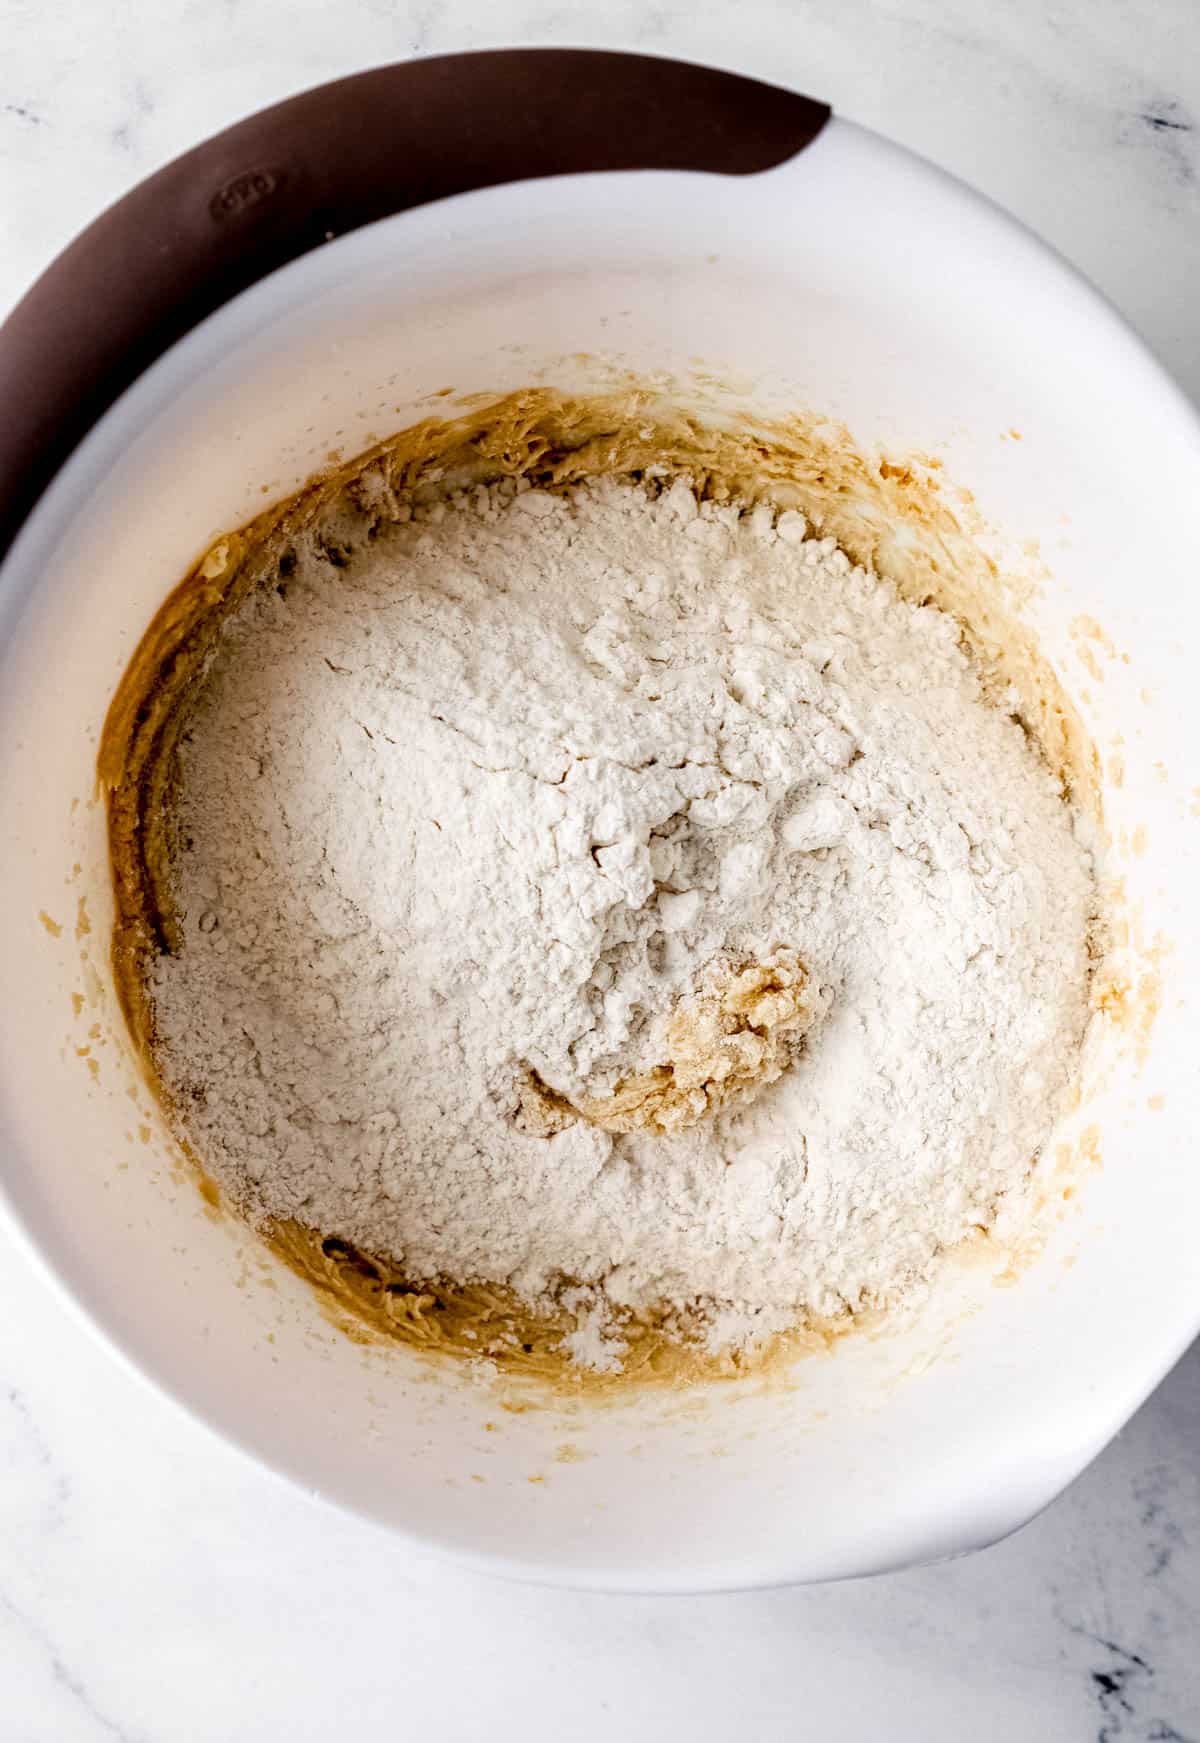 Wet and dry cookie ingredients combined in large white mixing bowl. 